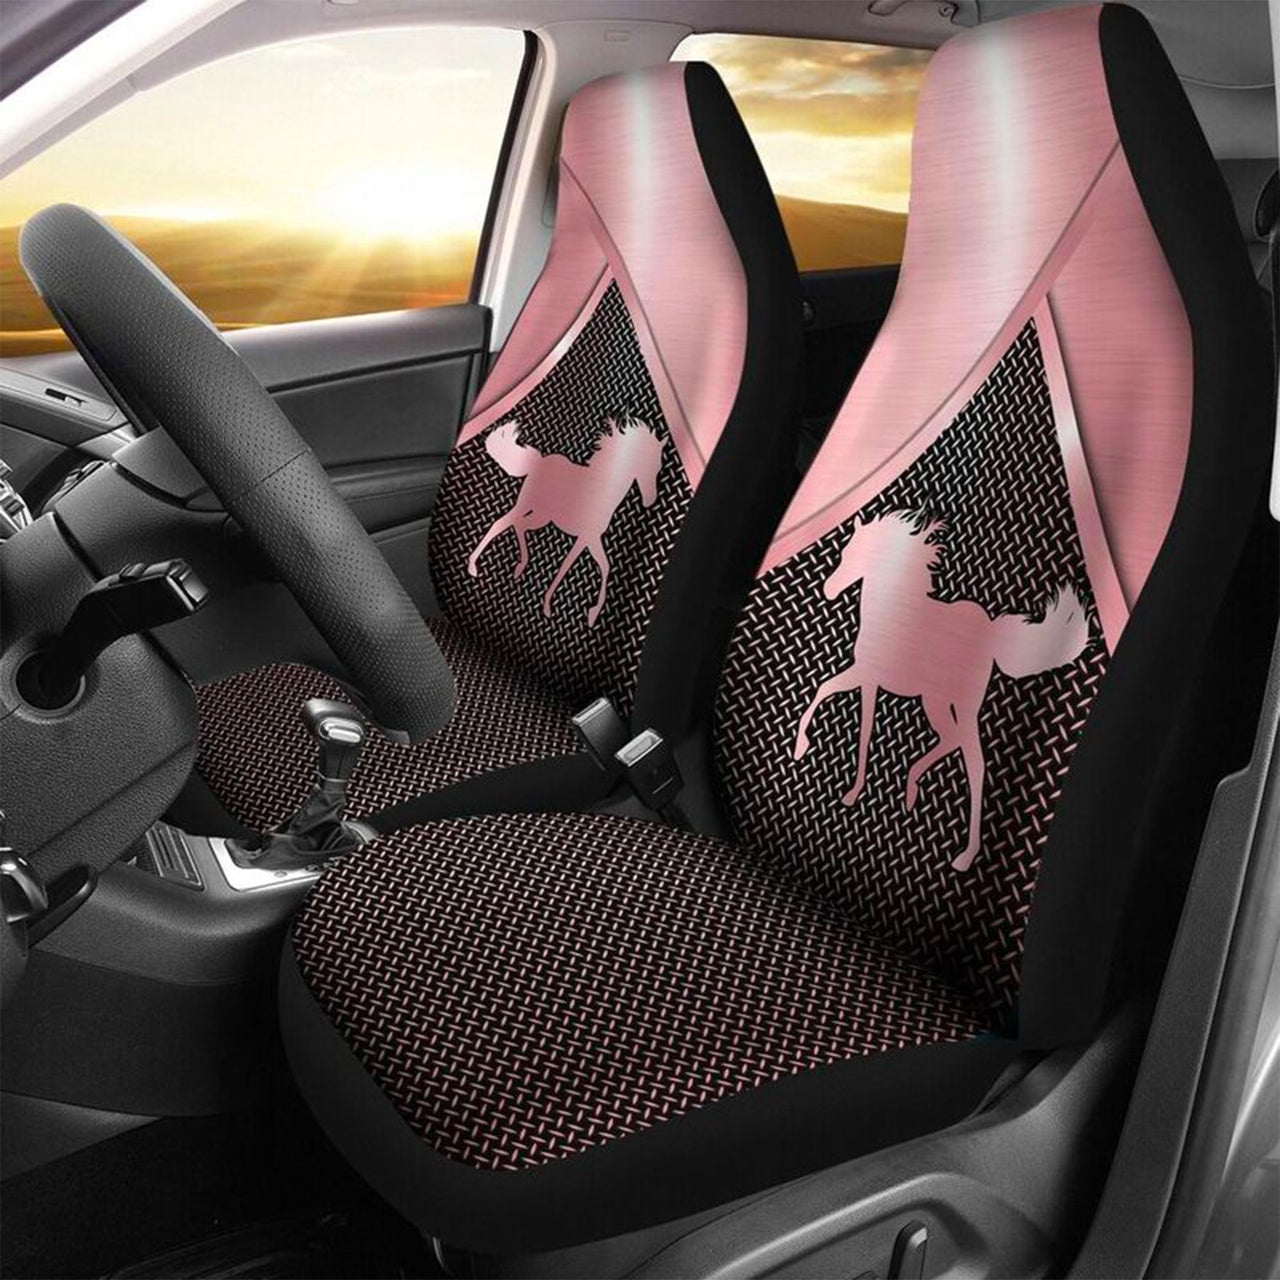 Custom Car Seat Cover Horse Pink 3D Silver Metal Seat Covers for Cars